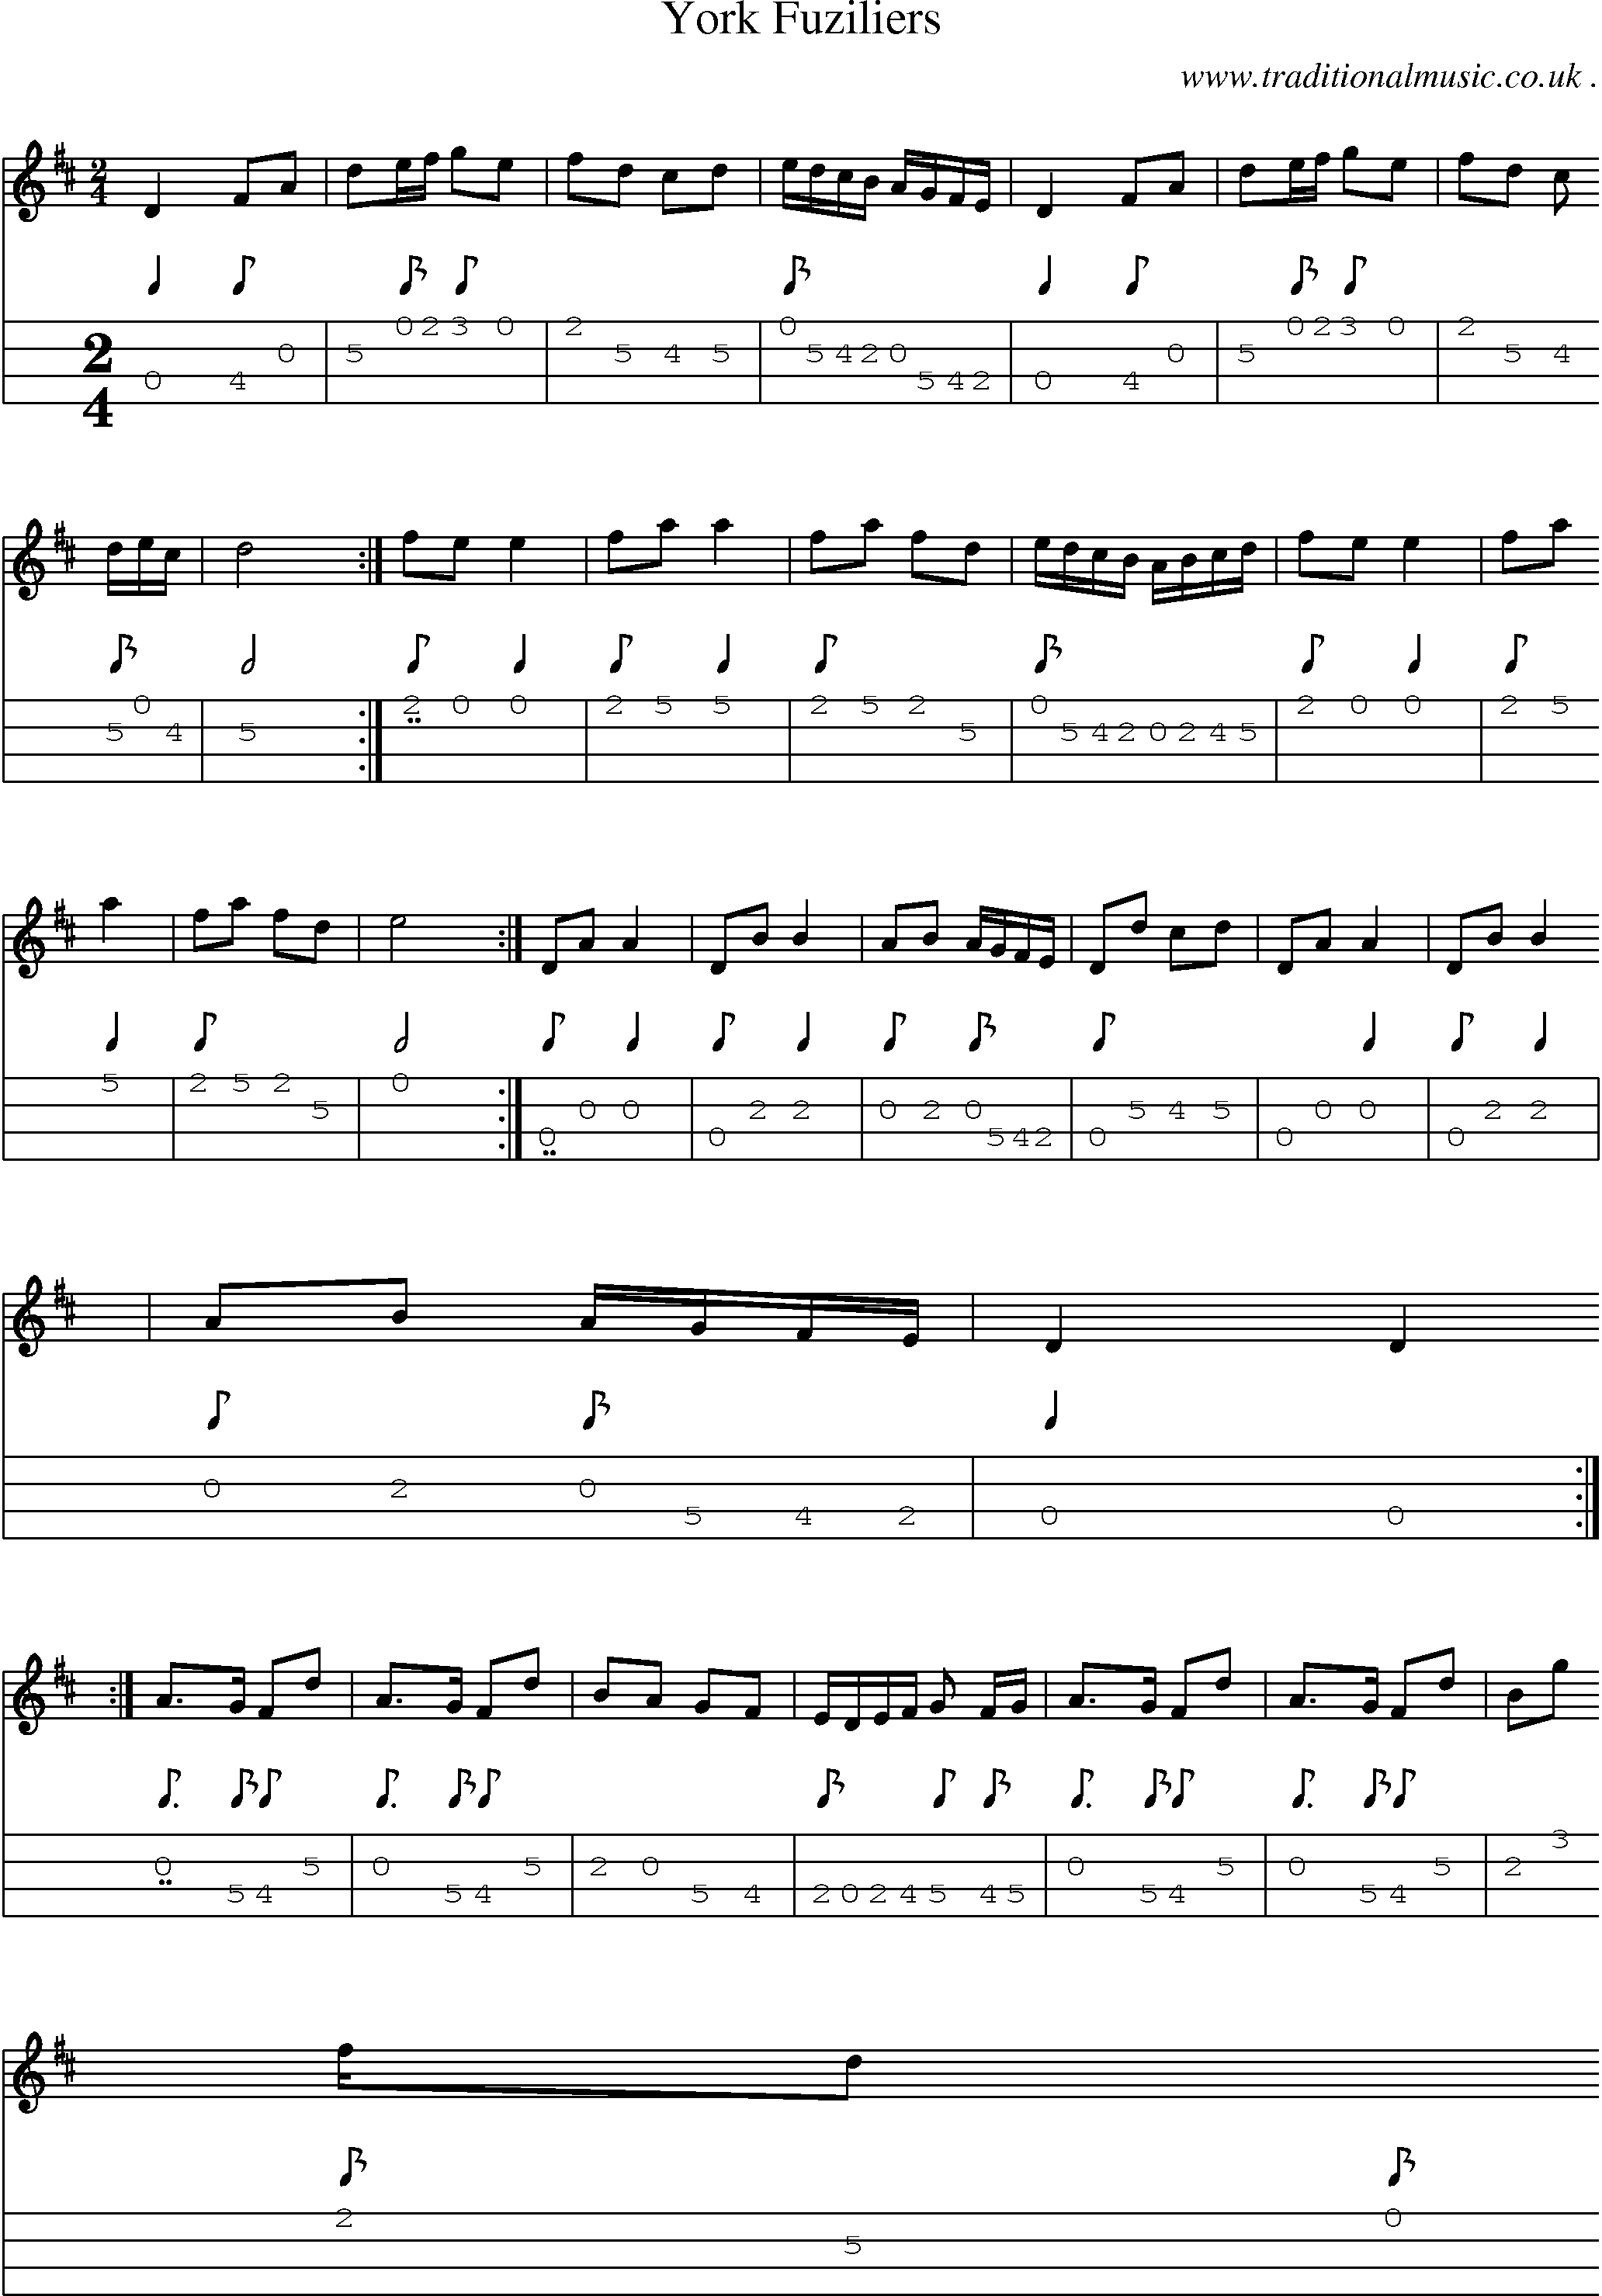 Music Score and Guitar Tabs for York Fuziliers